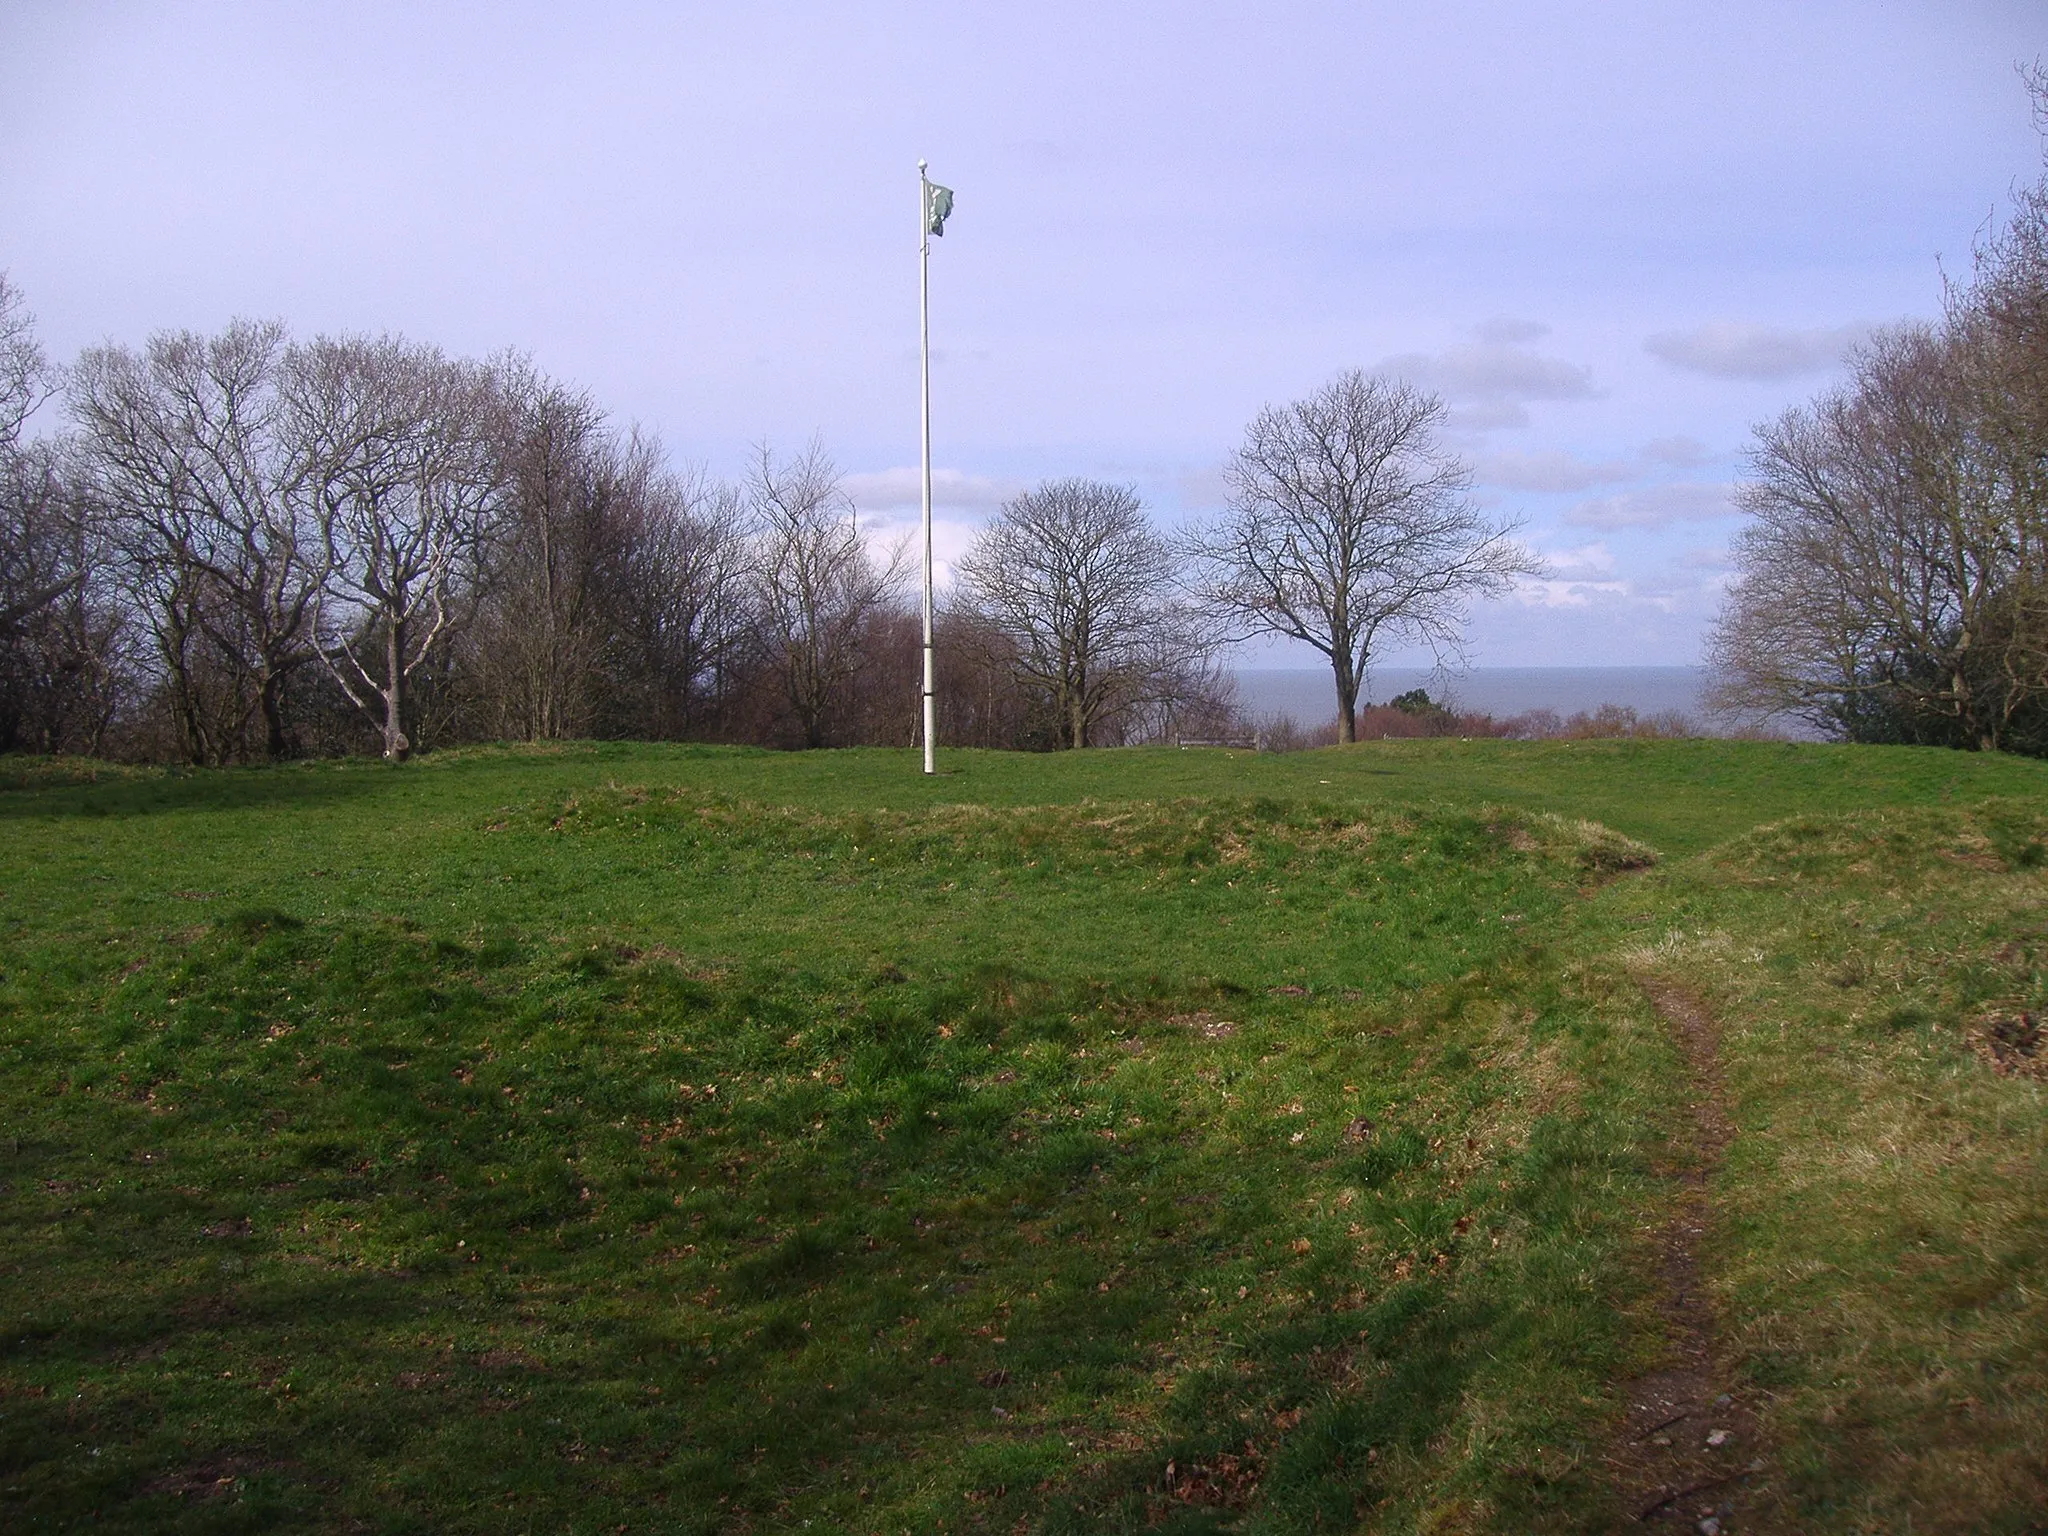 Photo showing: A Digital Photograph of the summit of Beacon hill the highest point in Norfolk taken by Stavros1 (talk) 14:24, 6 April 2008 (UTC)